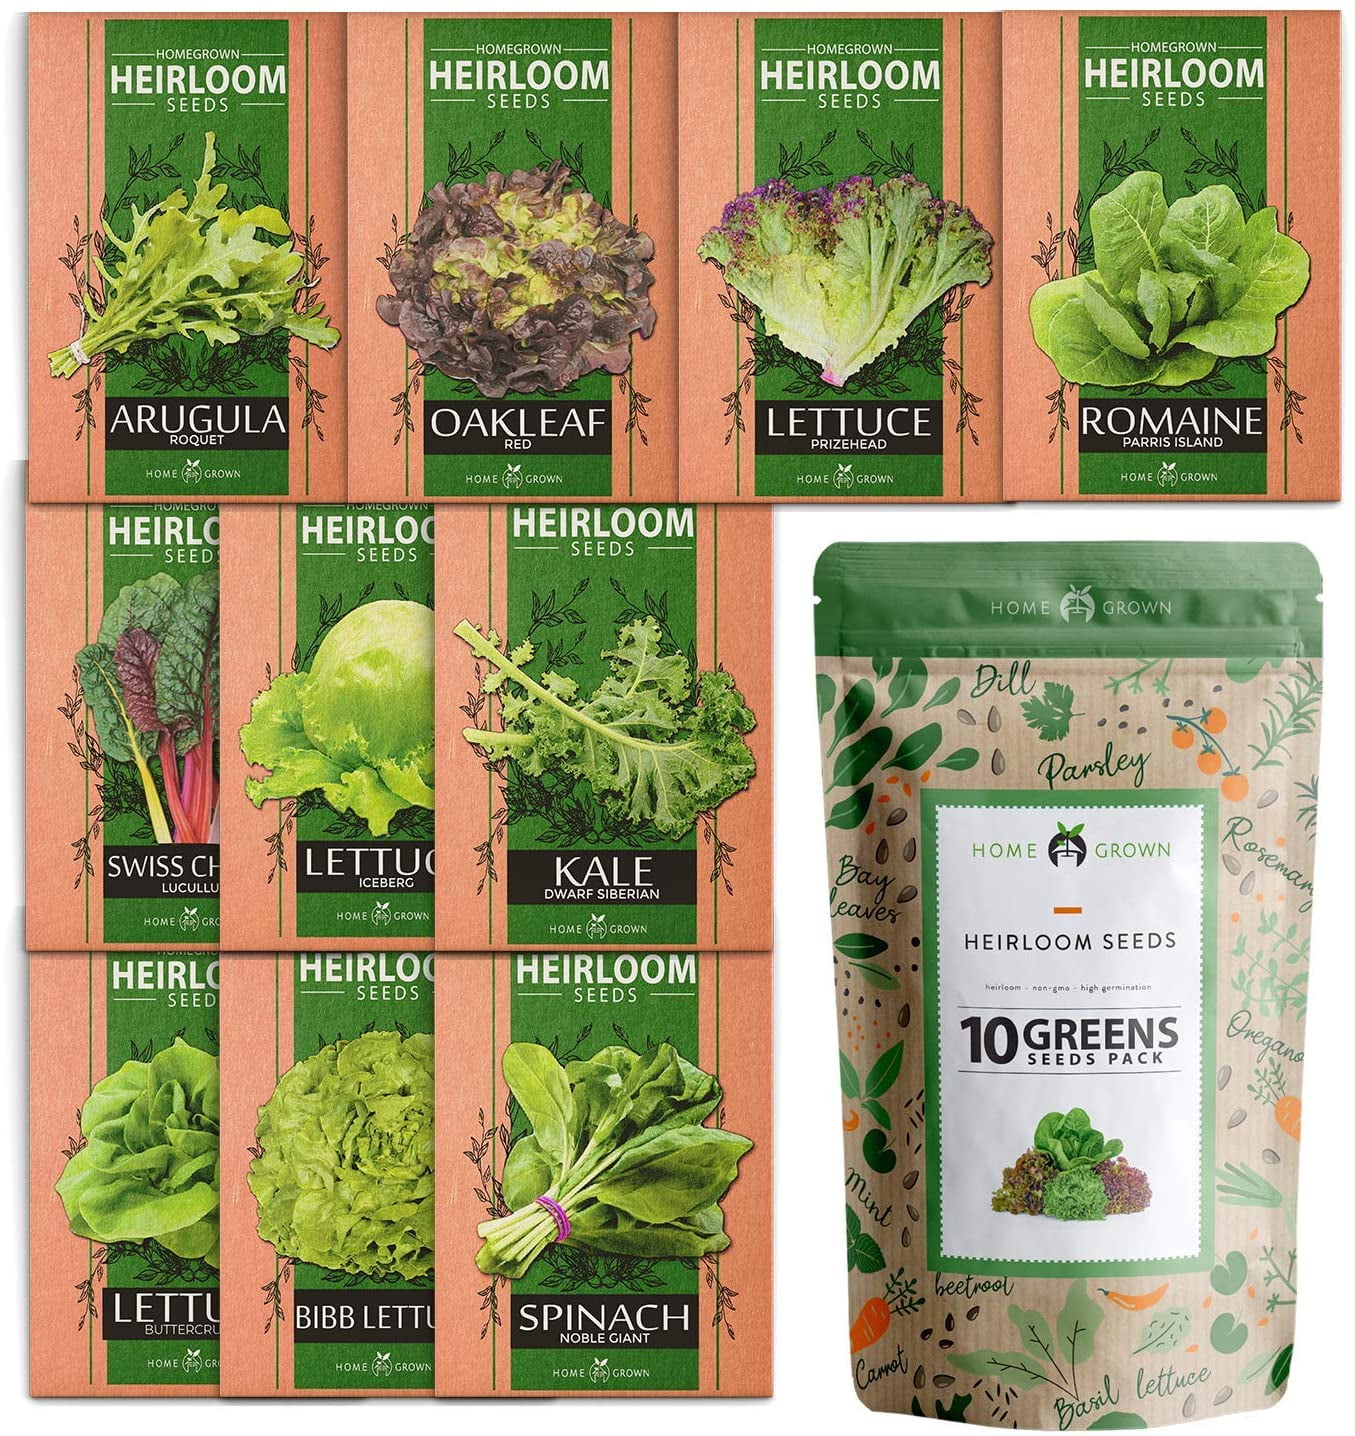 This is A Mix!! ORGANICALLY Grown 20 Varieties Seeds Heirloom Non-GMO 1000+ Lettuce Mix Seeds Please Read Seeds are not Individually Packaged!